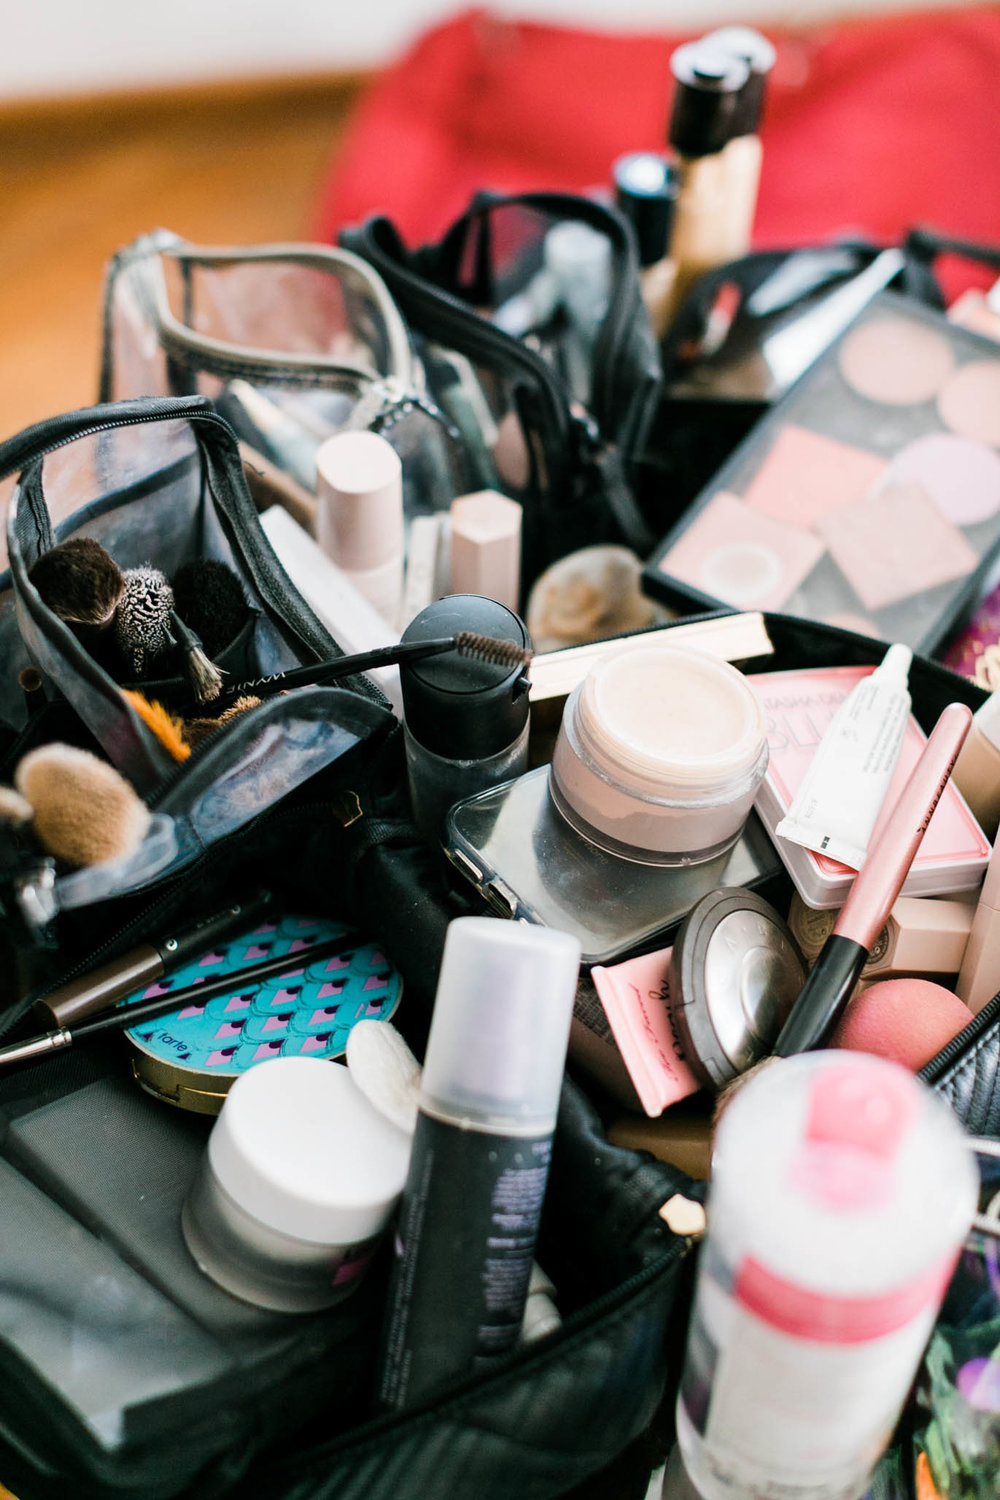 I oddly love photographing make-up bags. It usually gives you an idea of how the day starts.